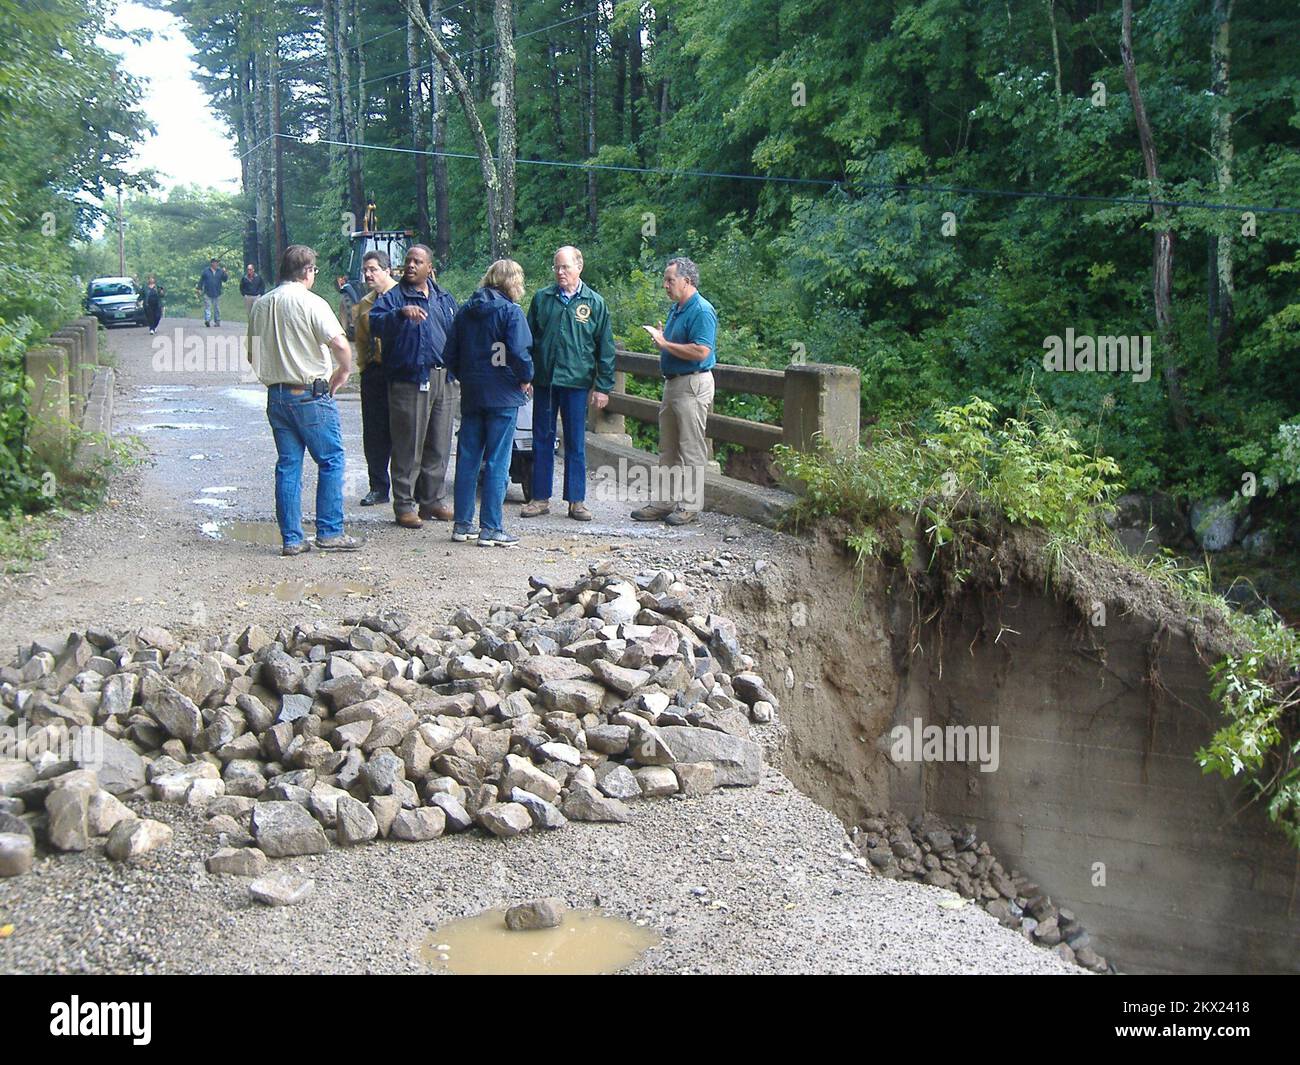 Ripton, Vermont, August 7, 2008   Vermont Governor Jim Douglas and FEMA FCO Phil Parr join local officials in surveying a damaged bridge. Several days of heavy rains caused flash flooding in much of Central Vermont. FEMA Photo/Brian Hvinden.. Photographs Relating to Disasters and Emergency Management Programs, Activities, and Officials Stock Photo